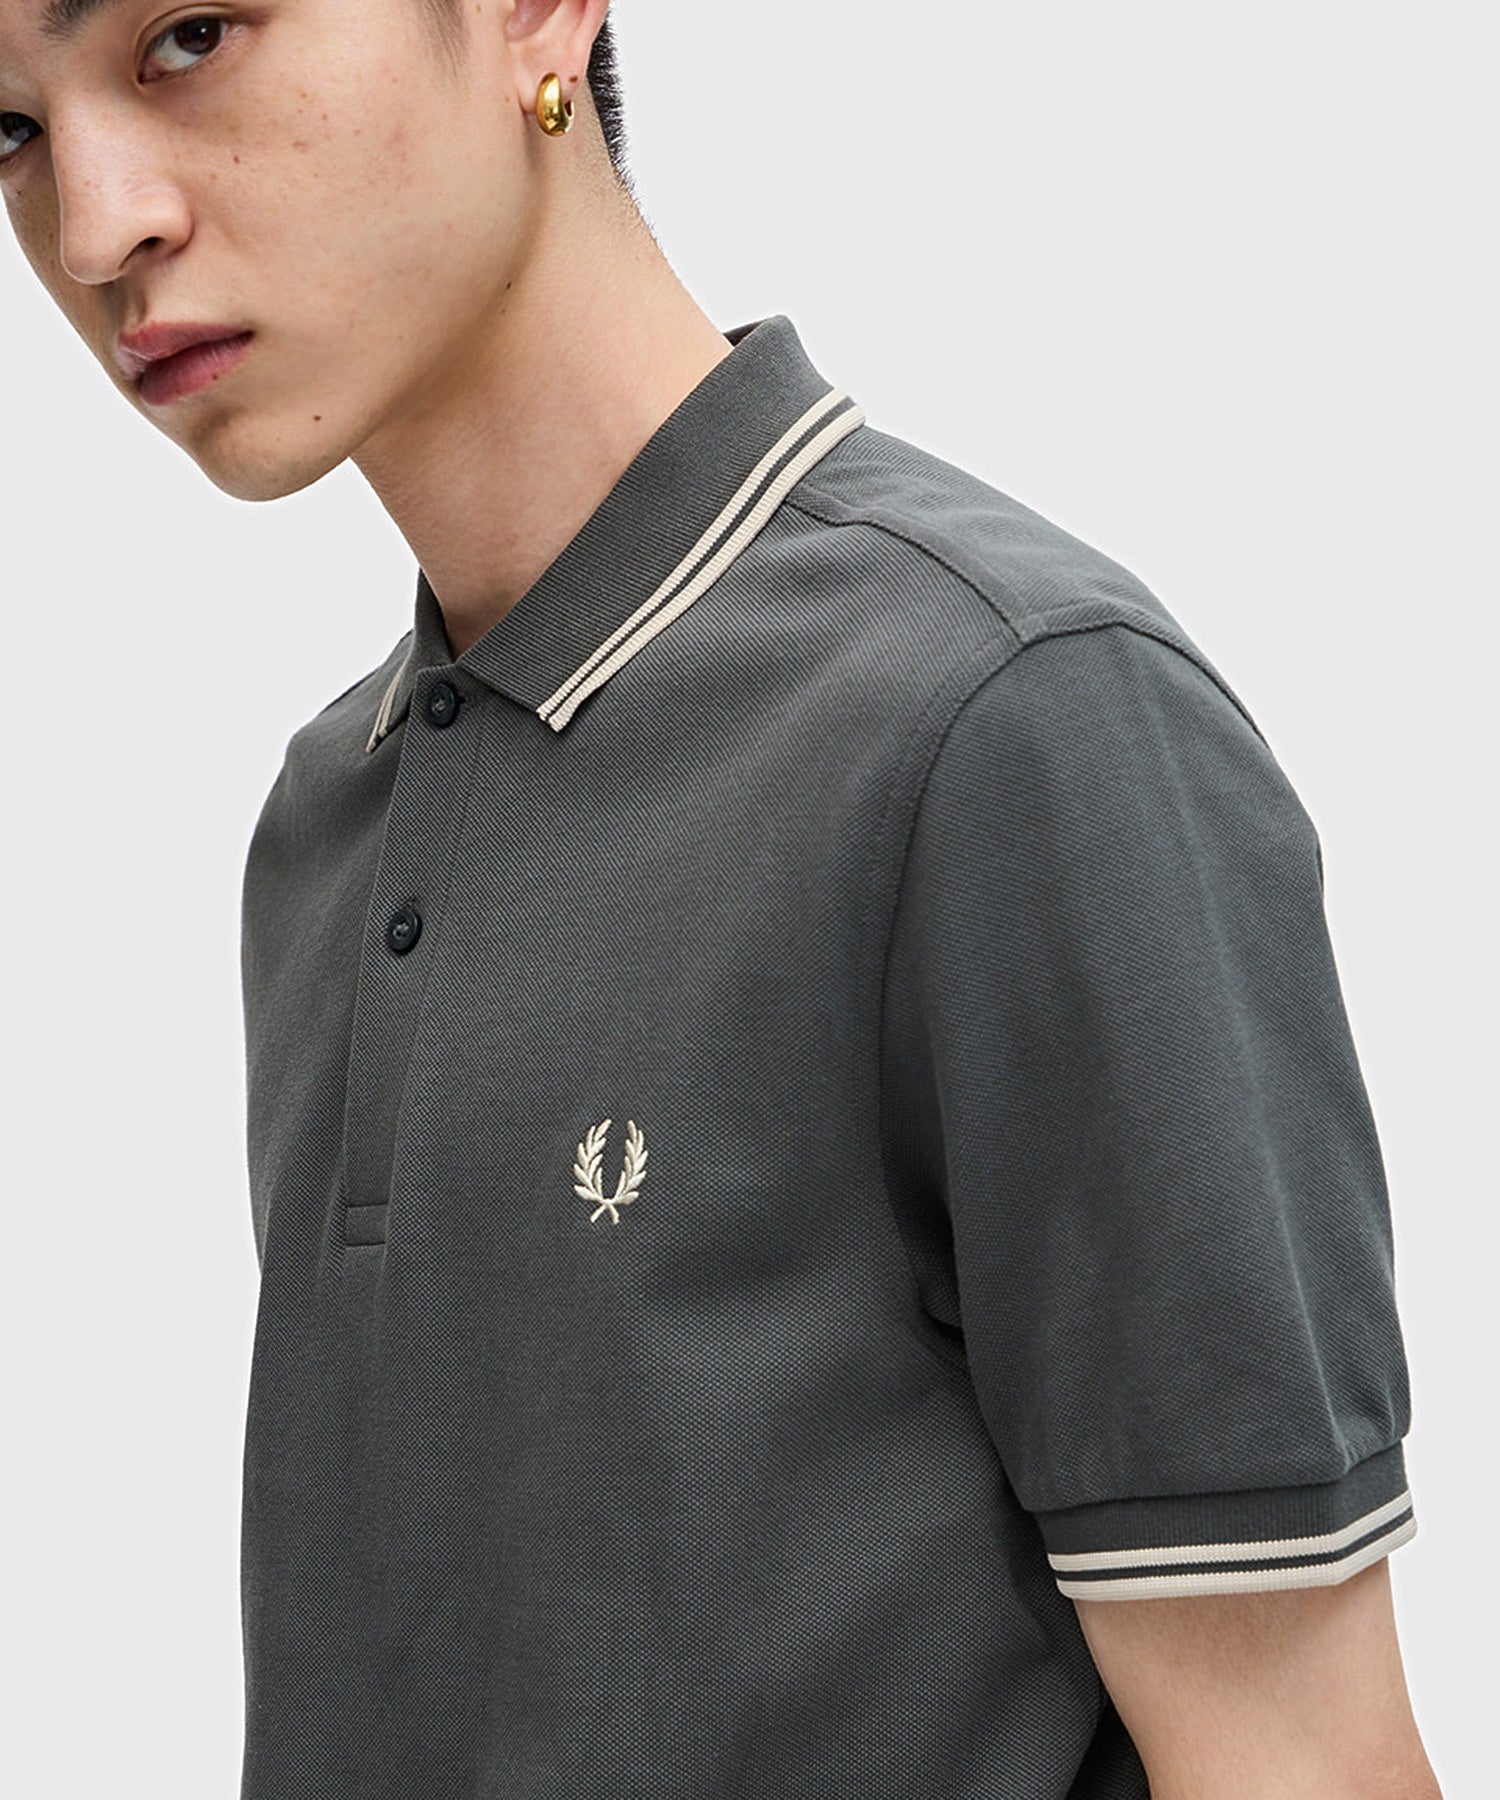 FRED PERRY/フレッドペリー/TWIN TIPPED FRED PERRY SHIRT/M3600/U98